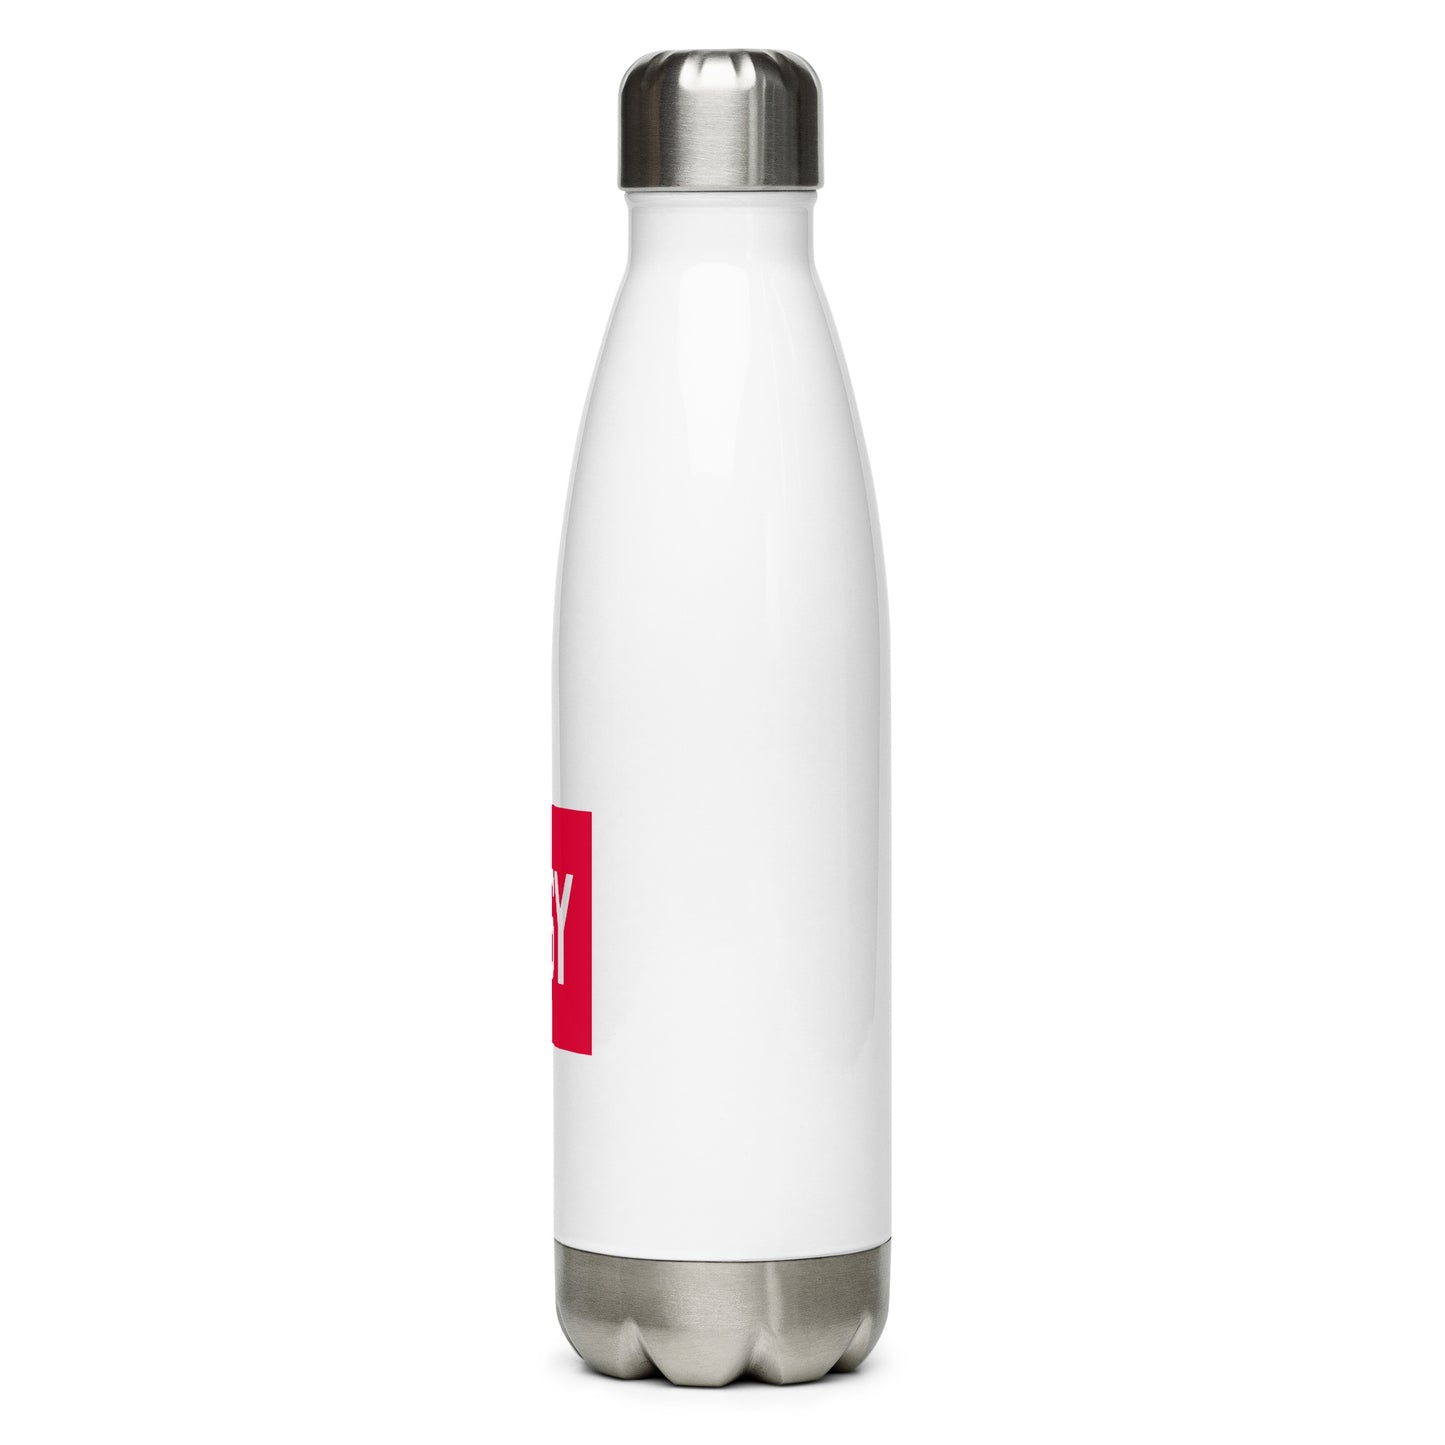 Aviator Gift Water Bottle - Crimson Graphic • MSY New Orleans • YHM Designs - Image 08